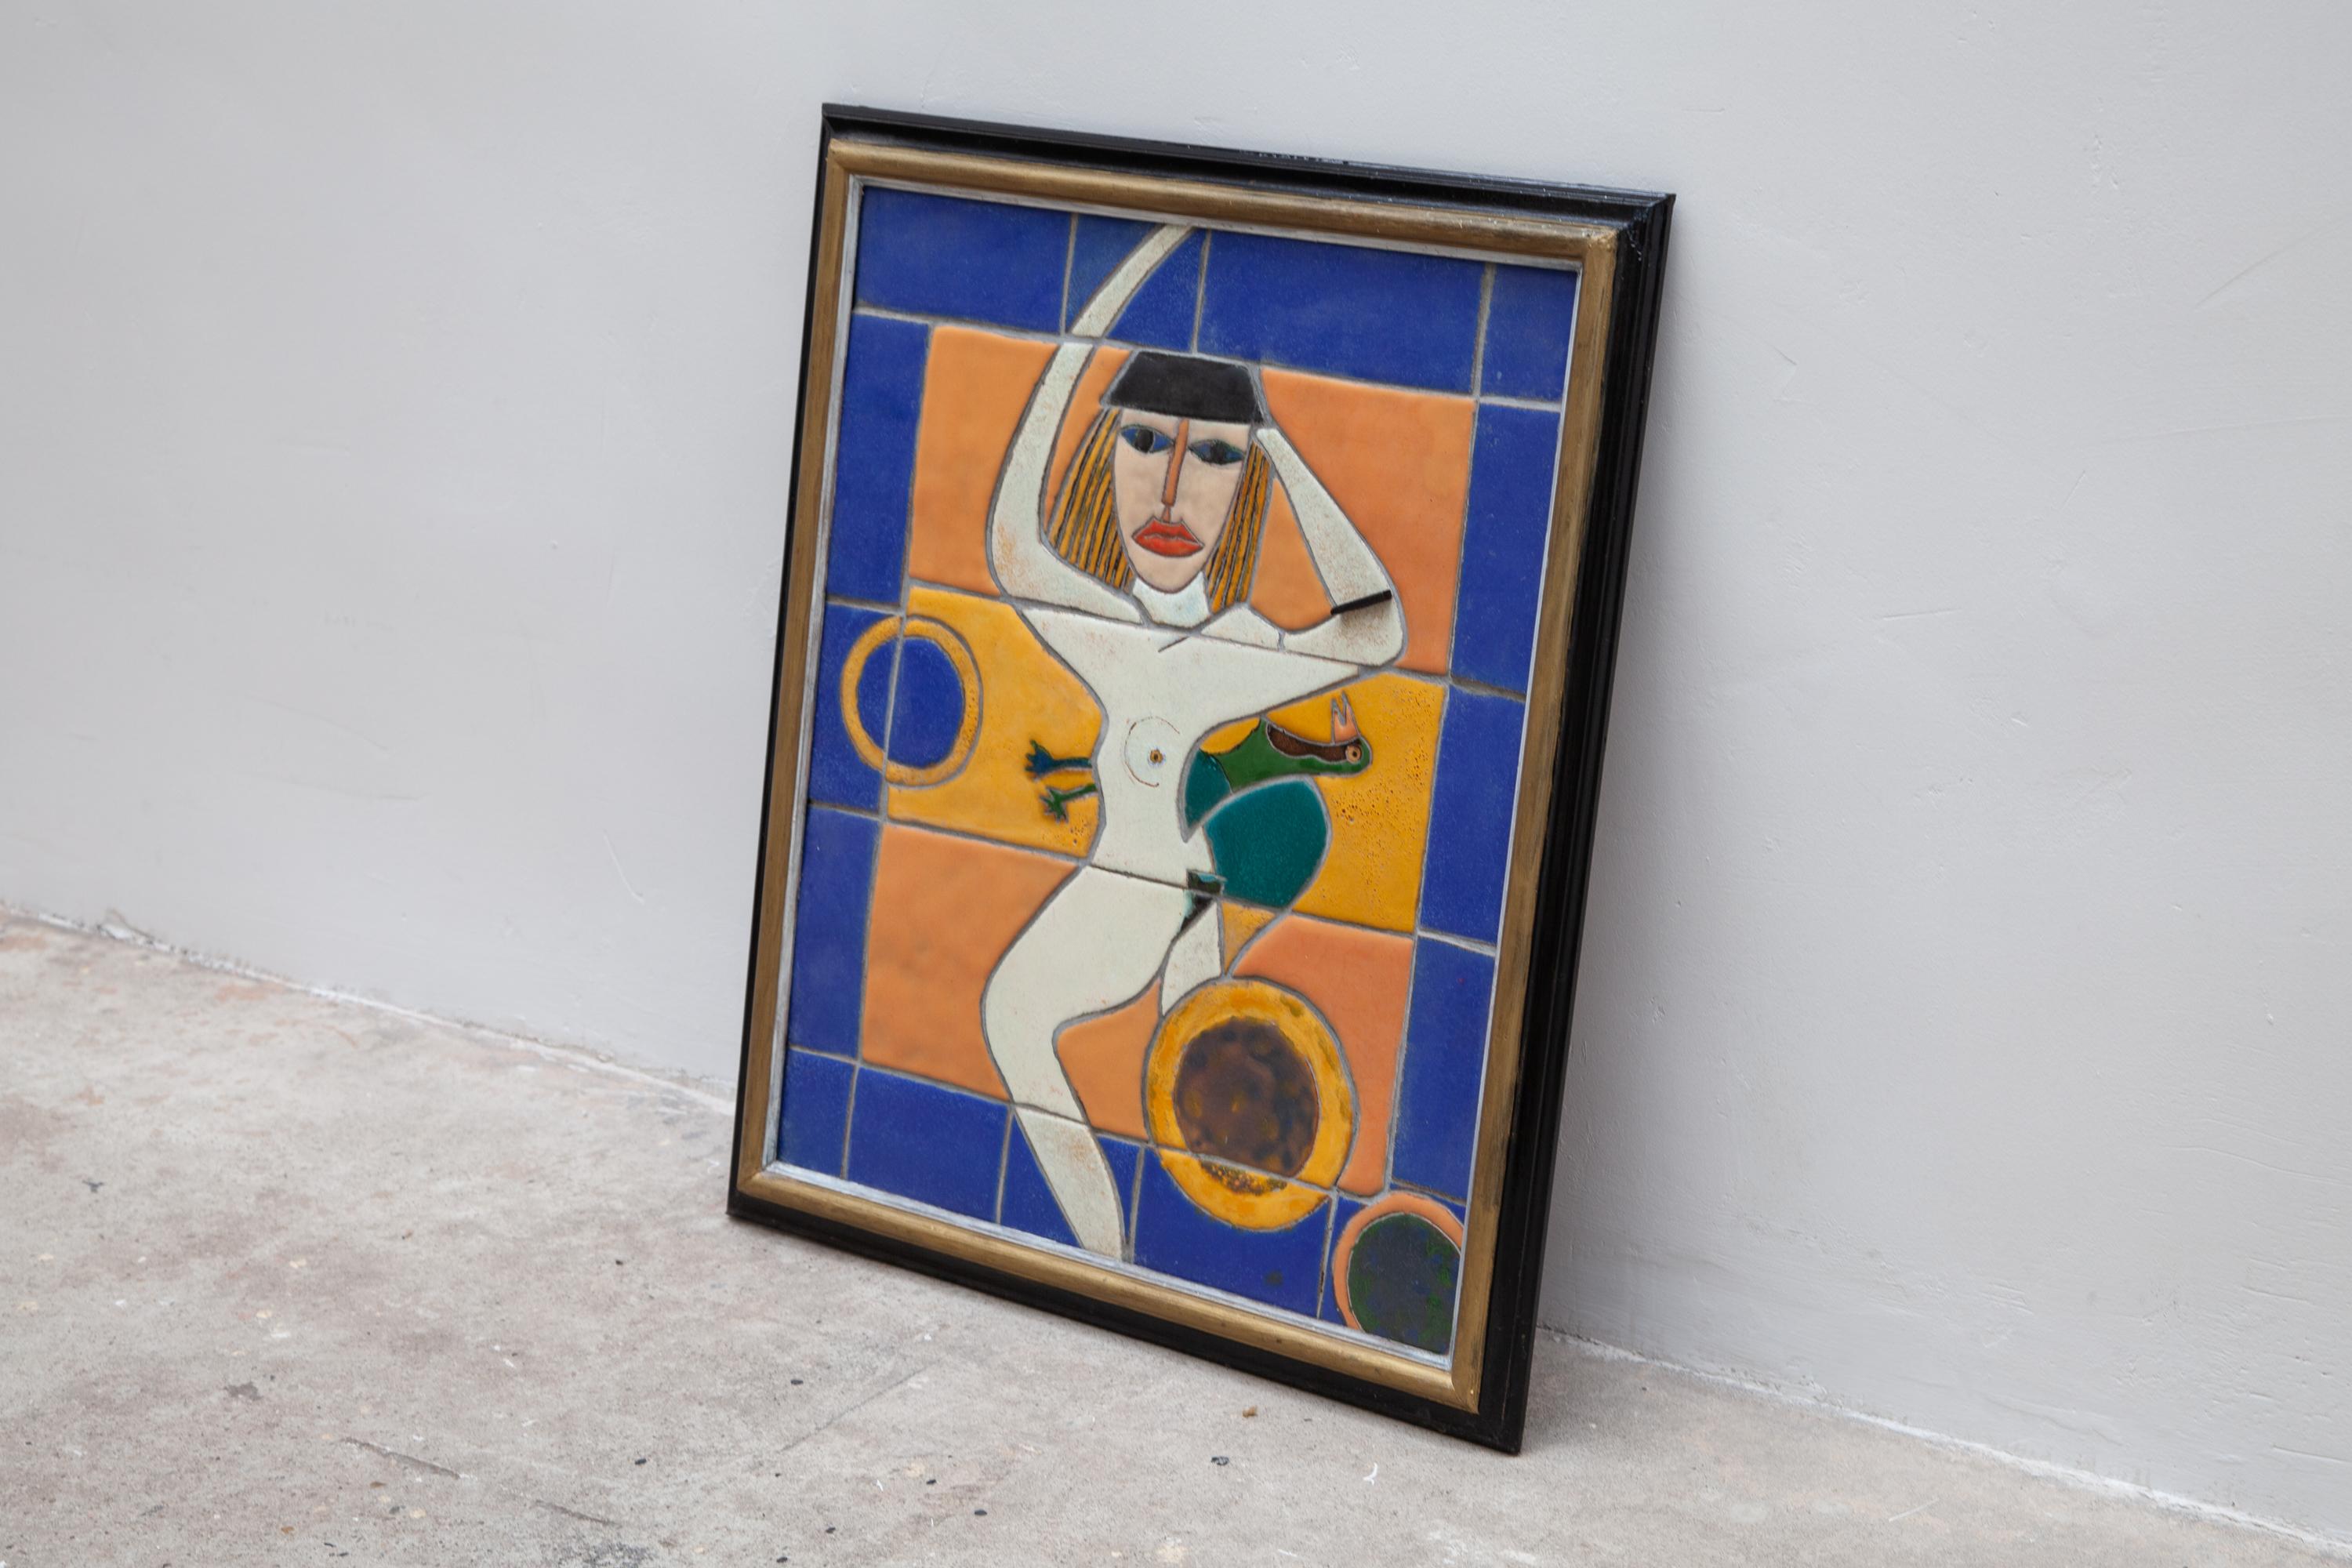 Vintage ceramic tile artwork featuring an abstract design of a woman with a bird in cobalt-blue, white, black, brown, yellow, orange and green. Black and gold frame. 1990s, stunning hand painted work of art in glazed ceramic.
The panel is in